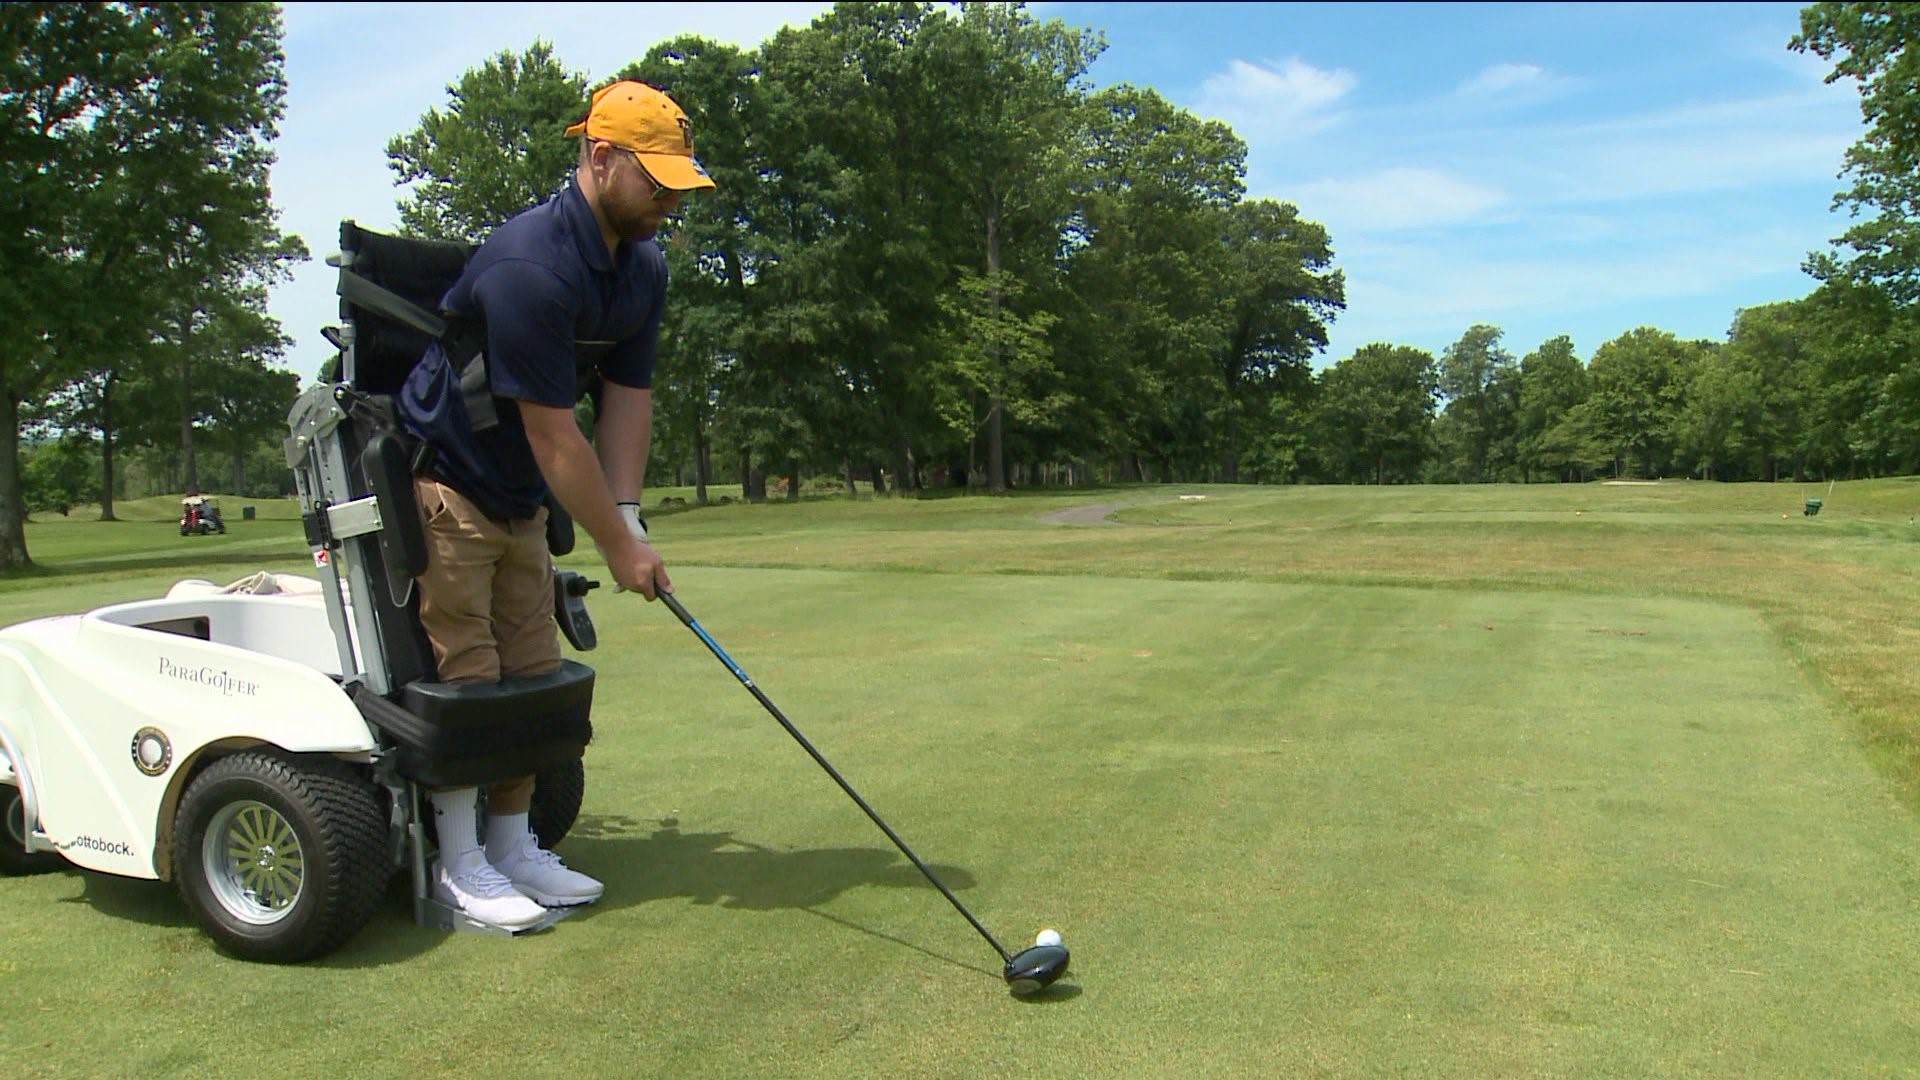 Adaptive golfers take to the tees in Wallingford